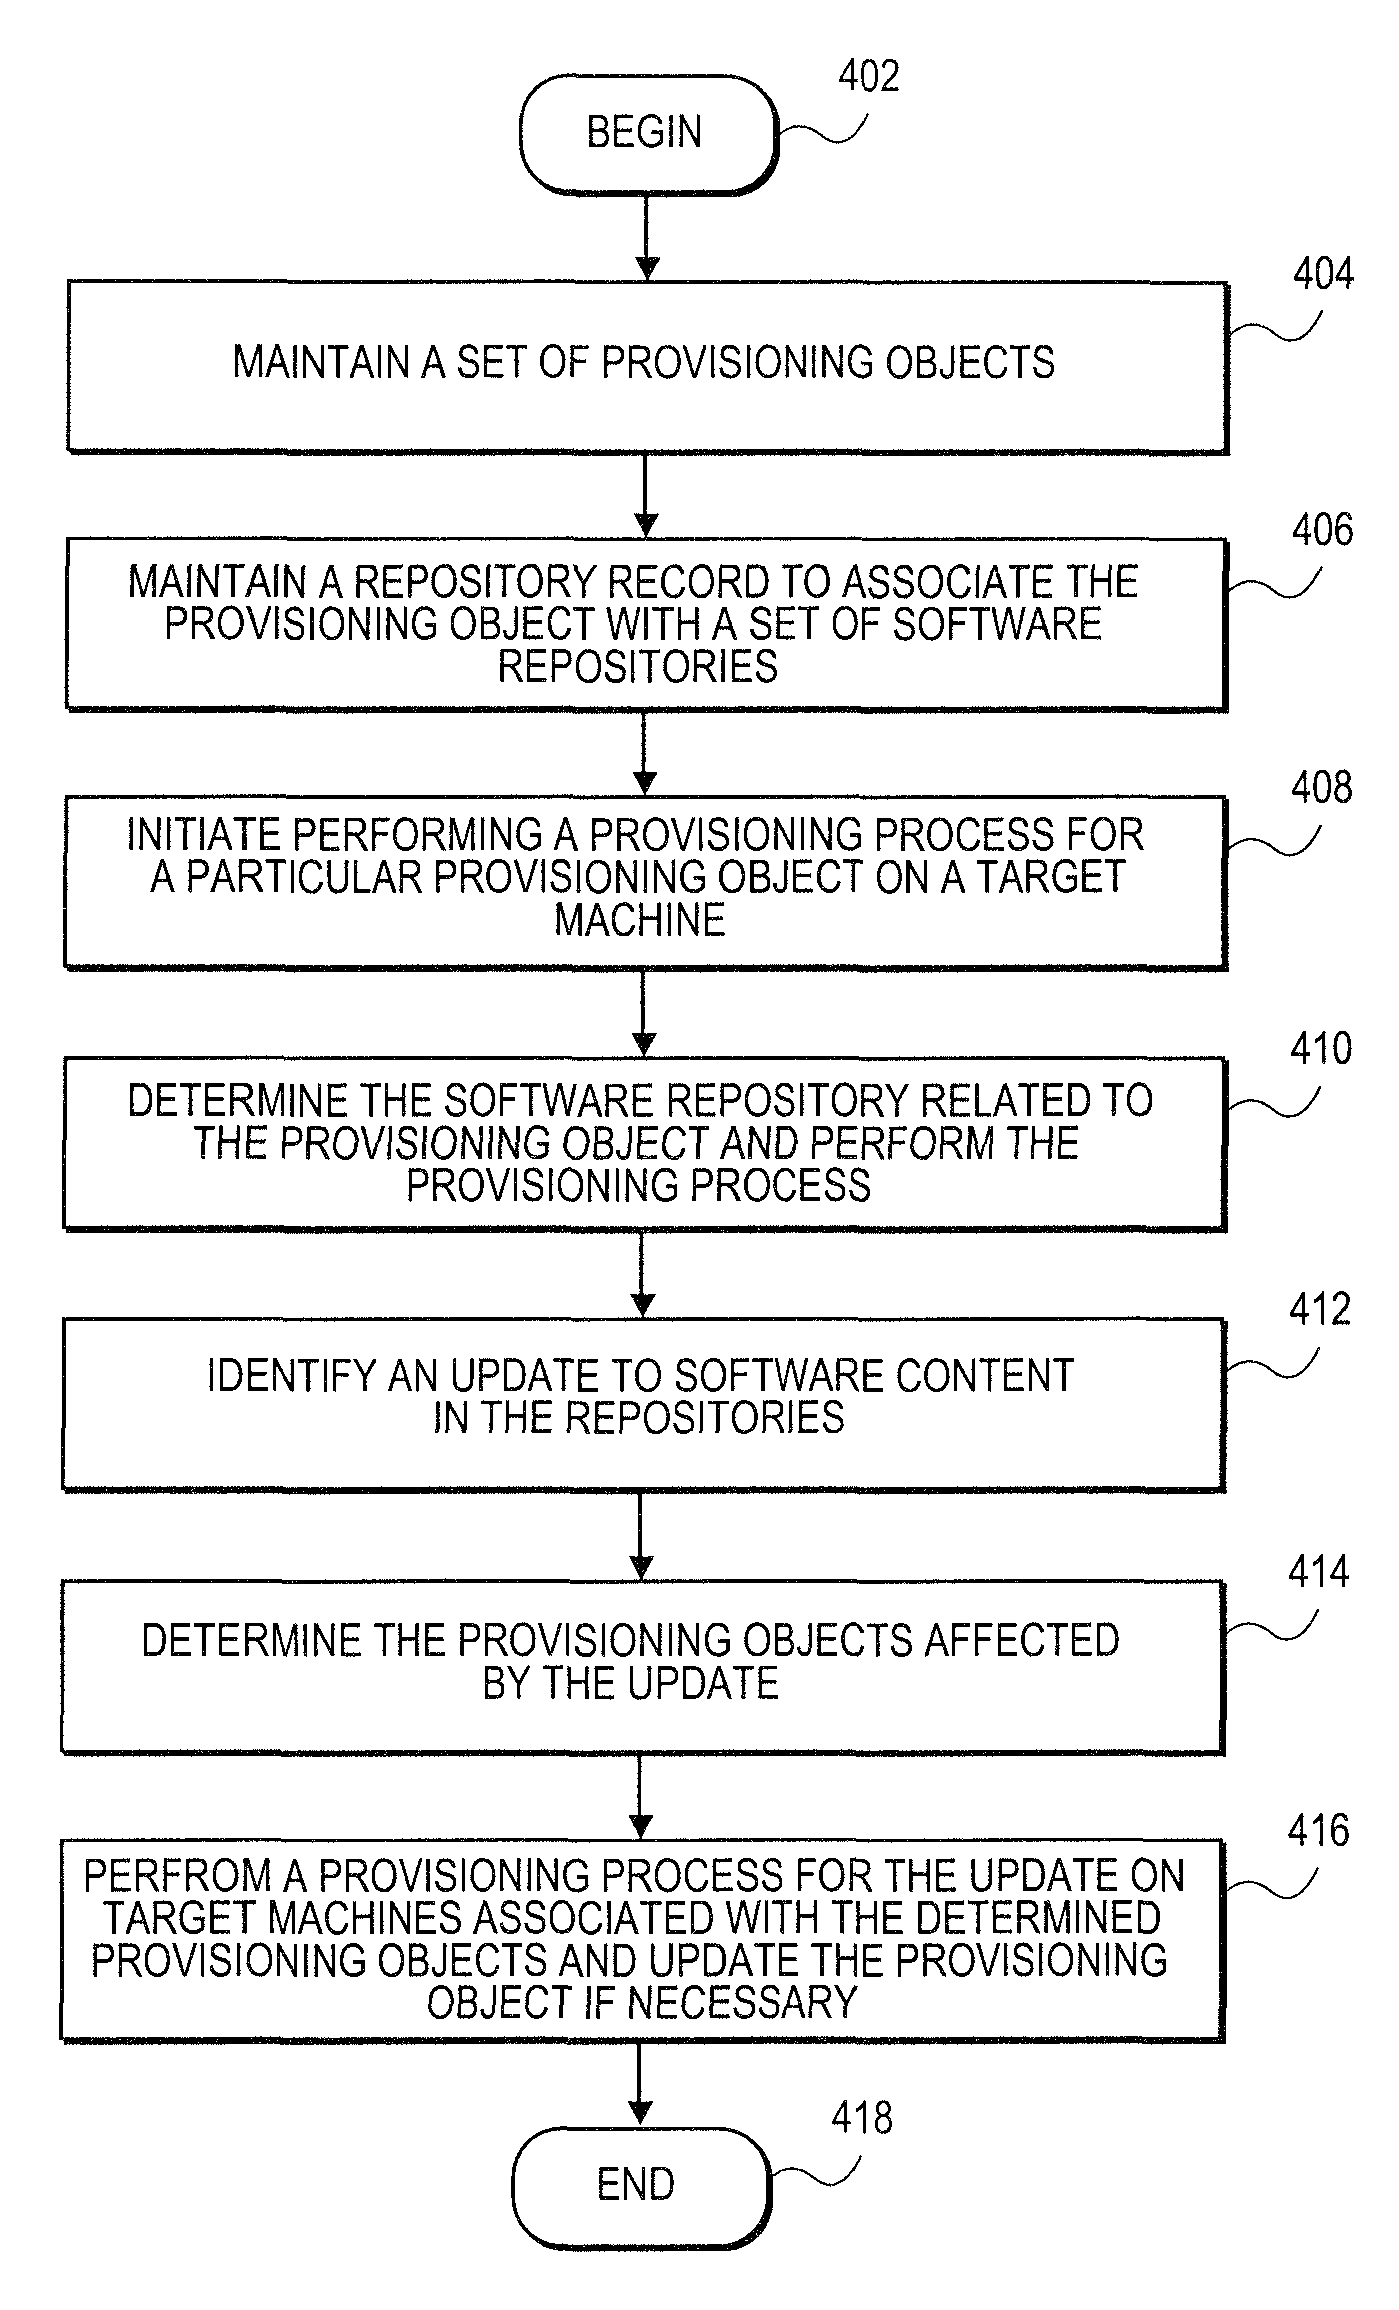 Systems and methods for abstracting software content management in a software provisioning environment